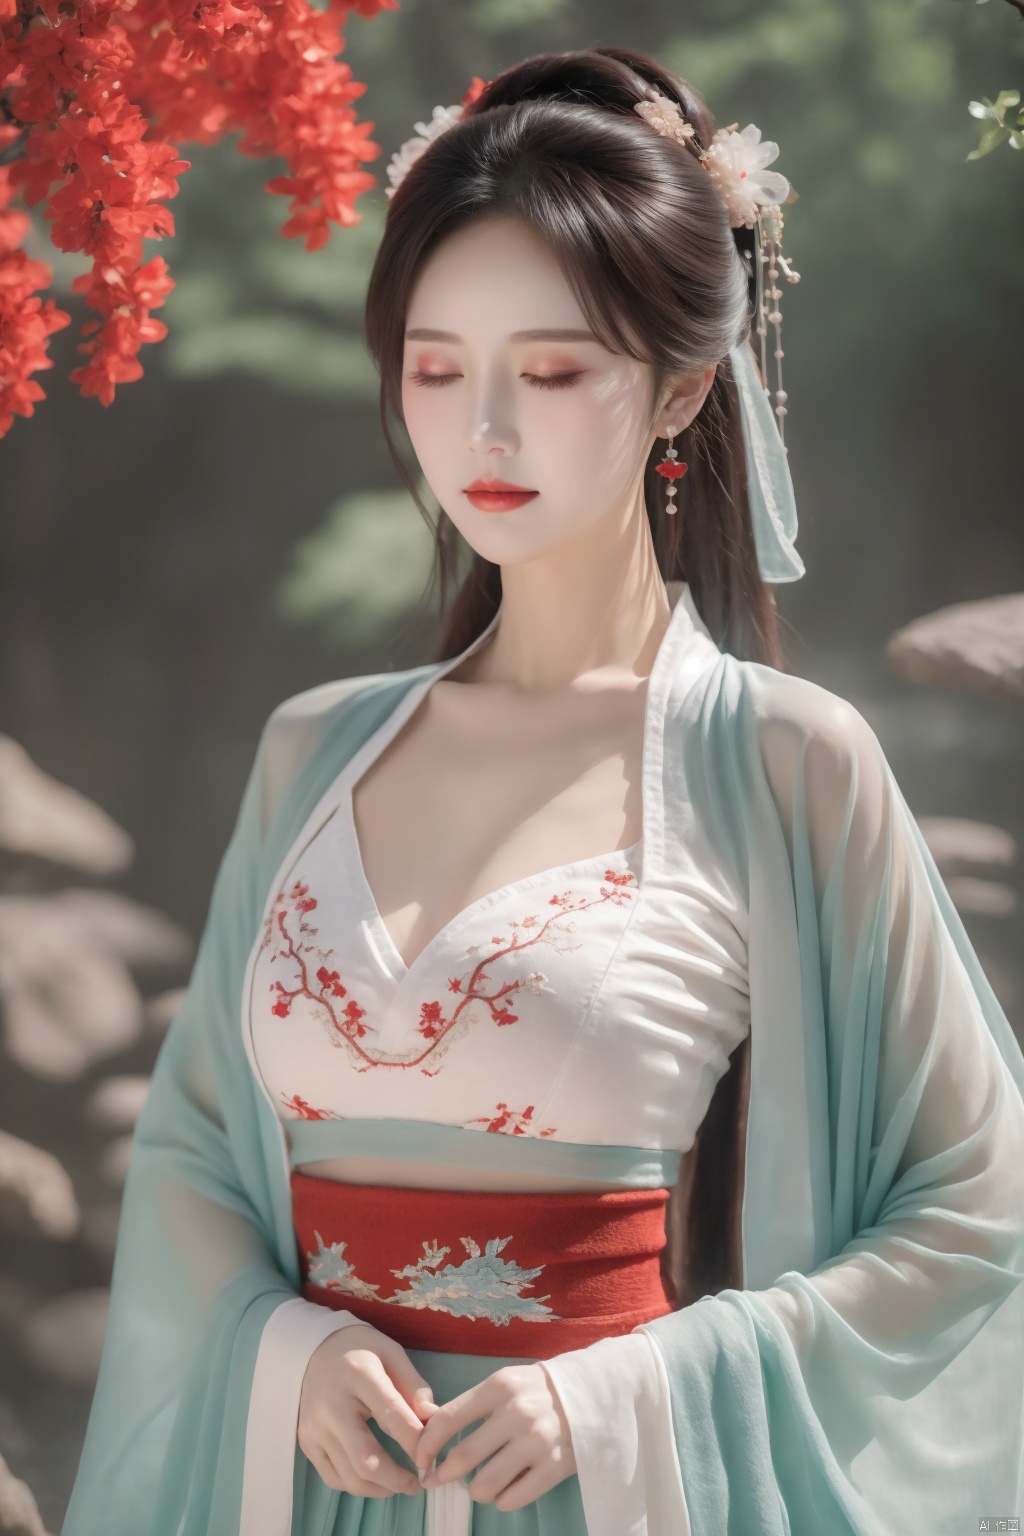  1 girls,Chinese ice crystal diamond earrings,be richly attired and heavily made-upEye shadow,blusher,Dress,chest,Plump breasts,Hanfu,(Clothing color: red),towel, veil, solo,forest_ background, closed_eyes，low-cut,transparent,Holding an embroidered yarn fan